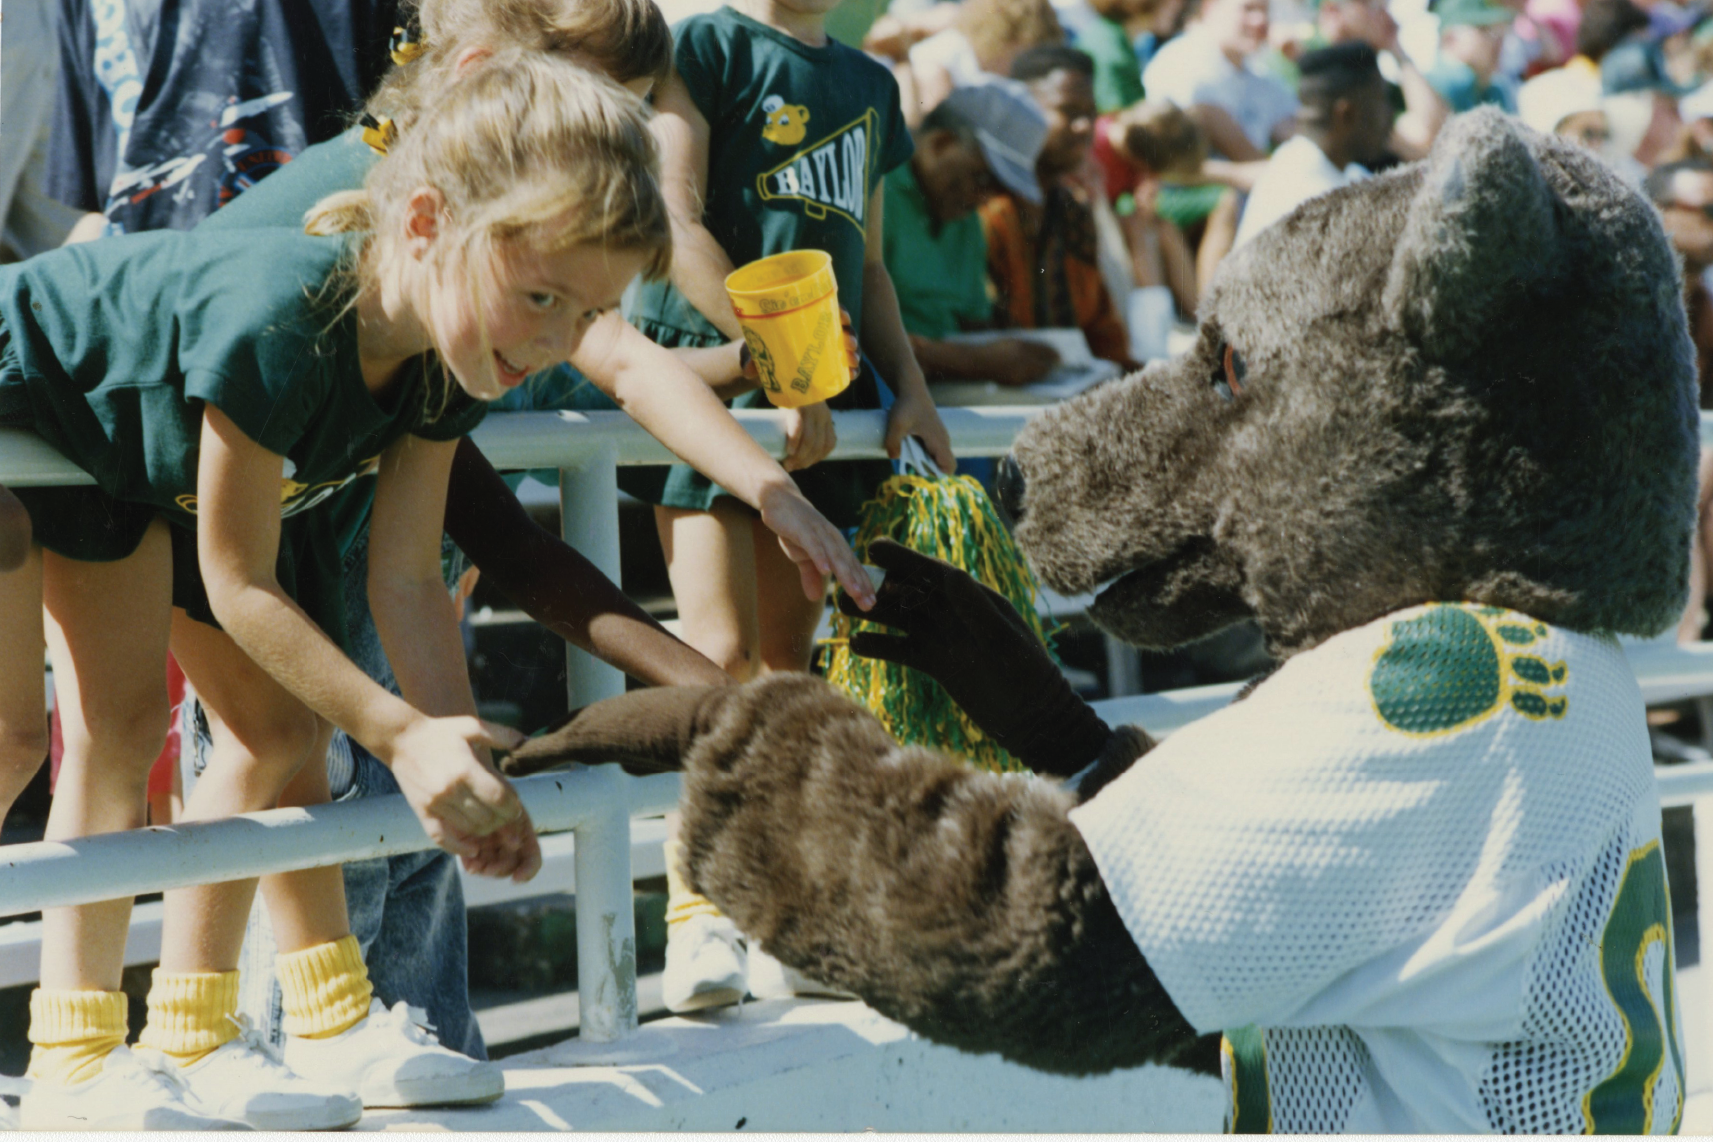 A costumed Bear mascot interacts with a young fan